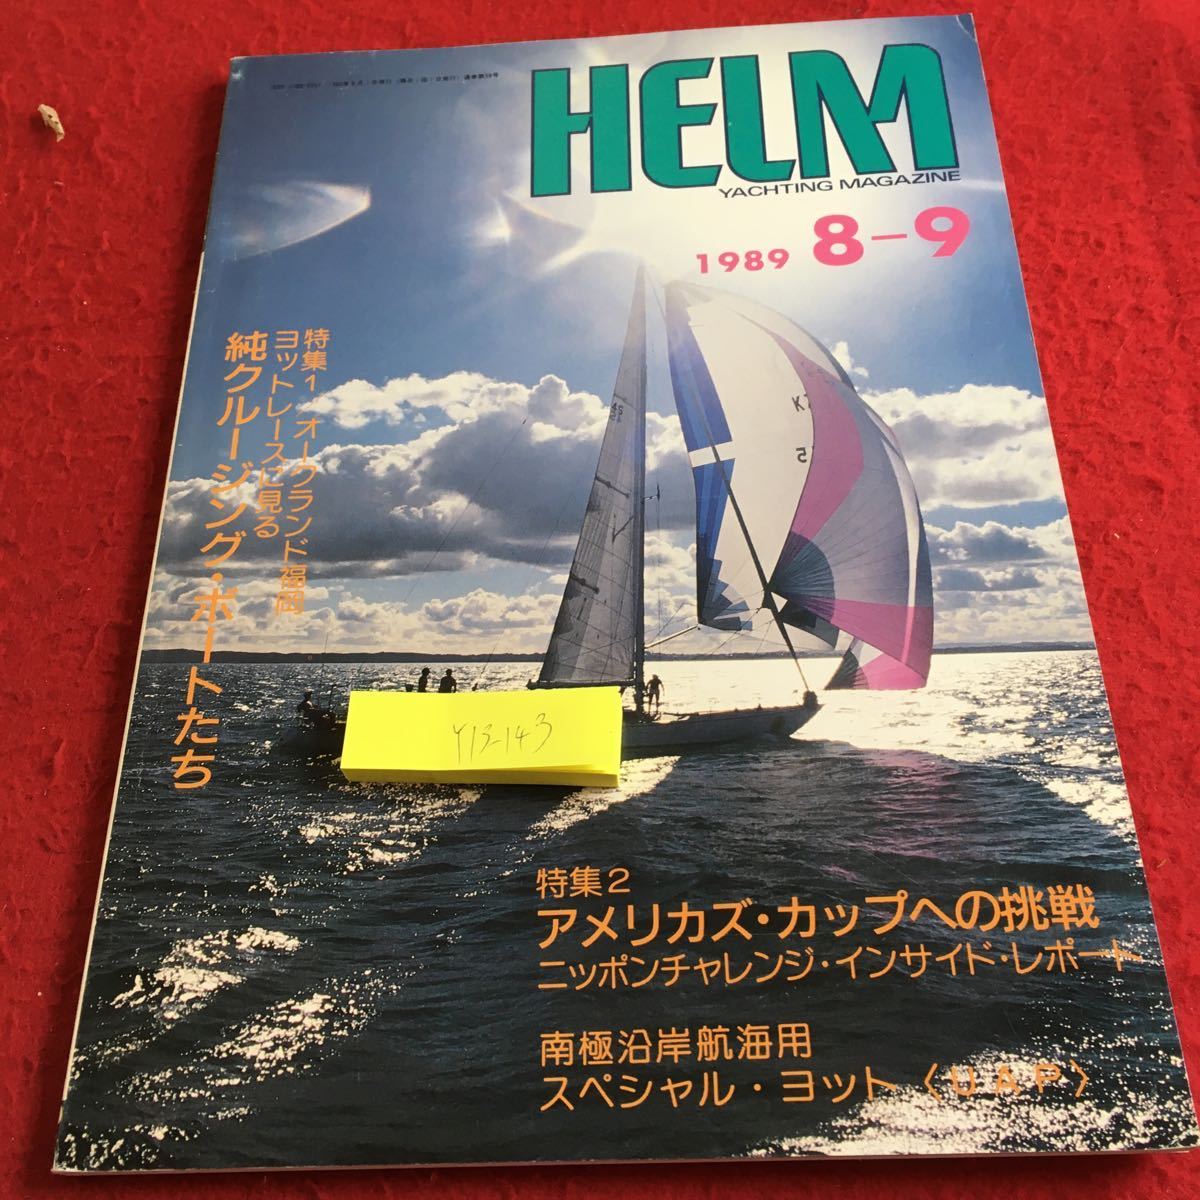 Y13-143 hell m1989 year issue special collection 1 okura ndo Fukuoka yacht race original cruising * boat .. special collection 2 american z* cup etc. . company 